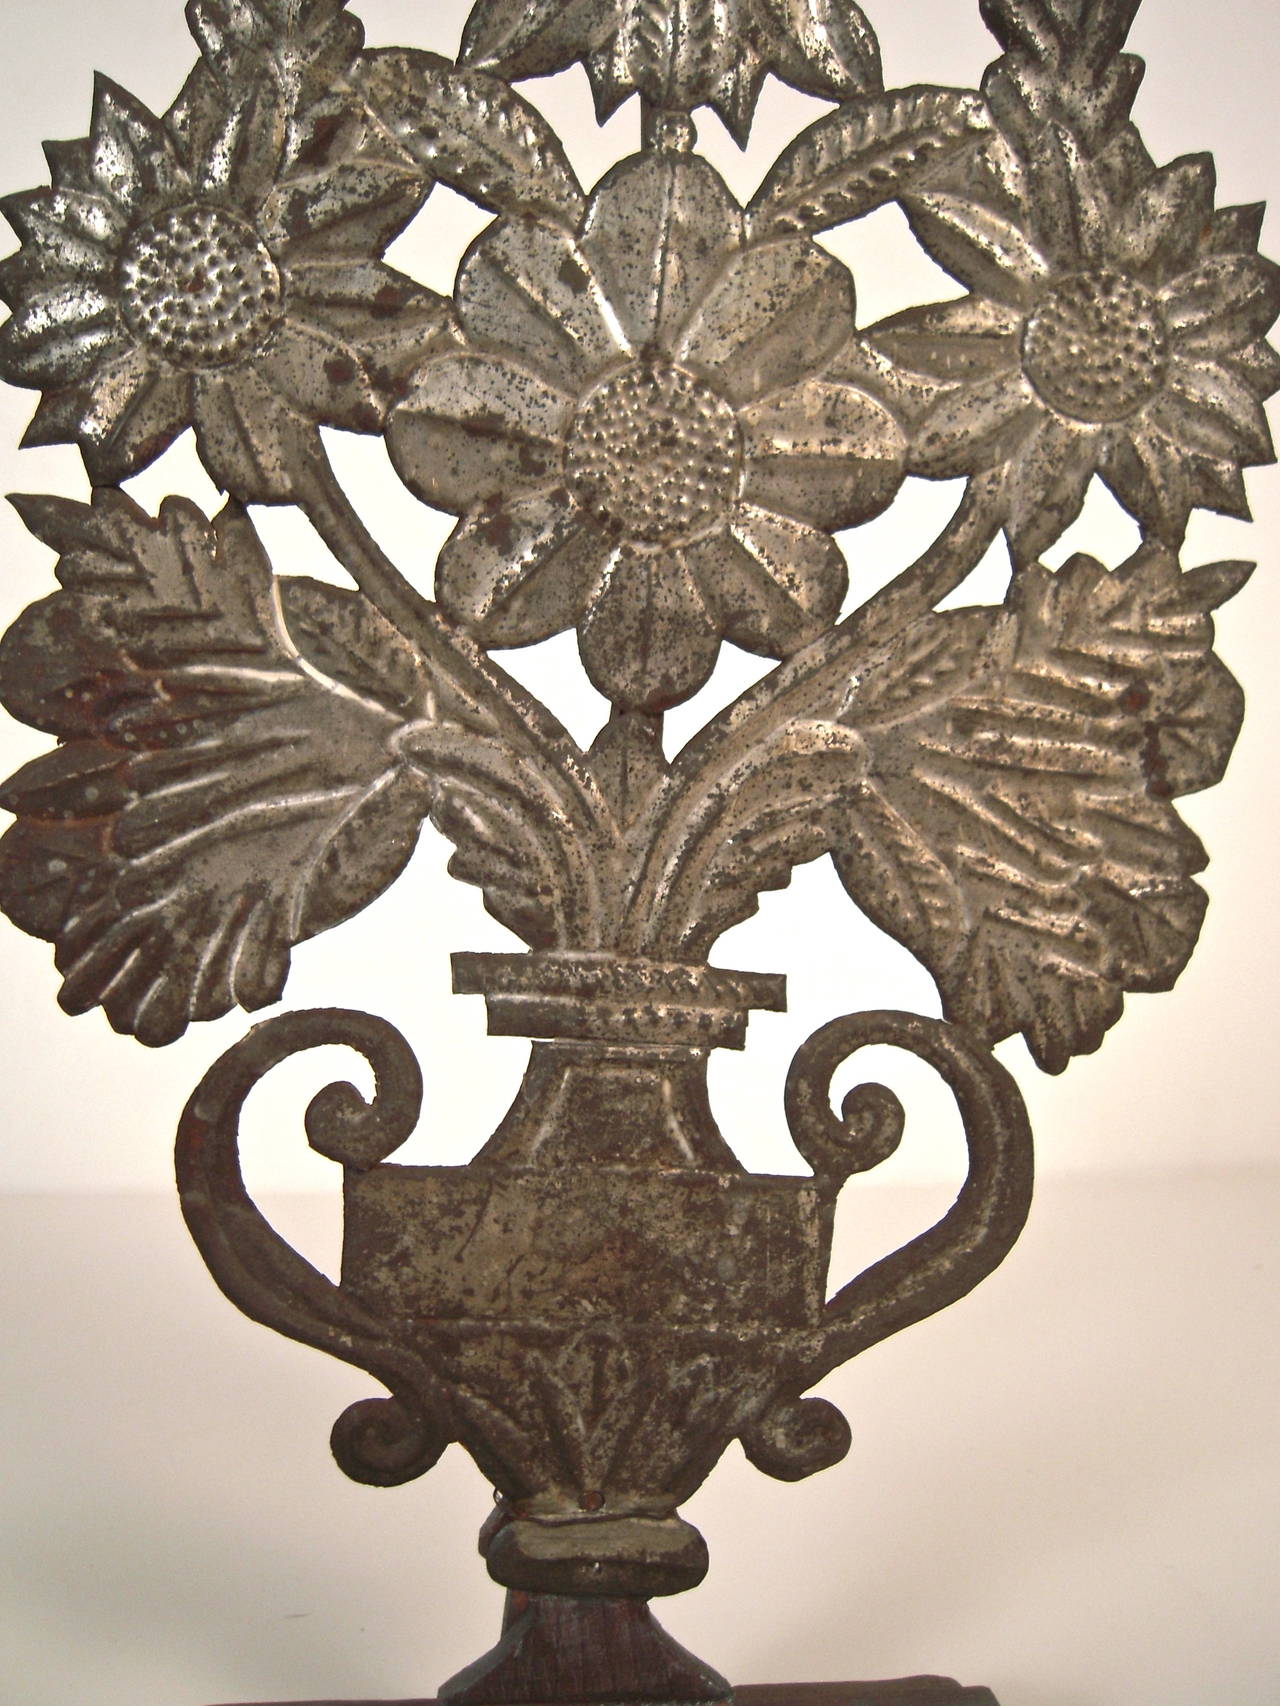 A charming and decorative pressed repousseé tin decoration in the form of a neoclassical urn containing an exuberant flower arrangement, mounted on a stained wooden stepped plinth. Possibly Mexican?

Measure: H: 17 1/4